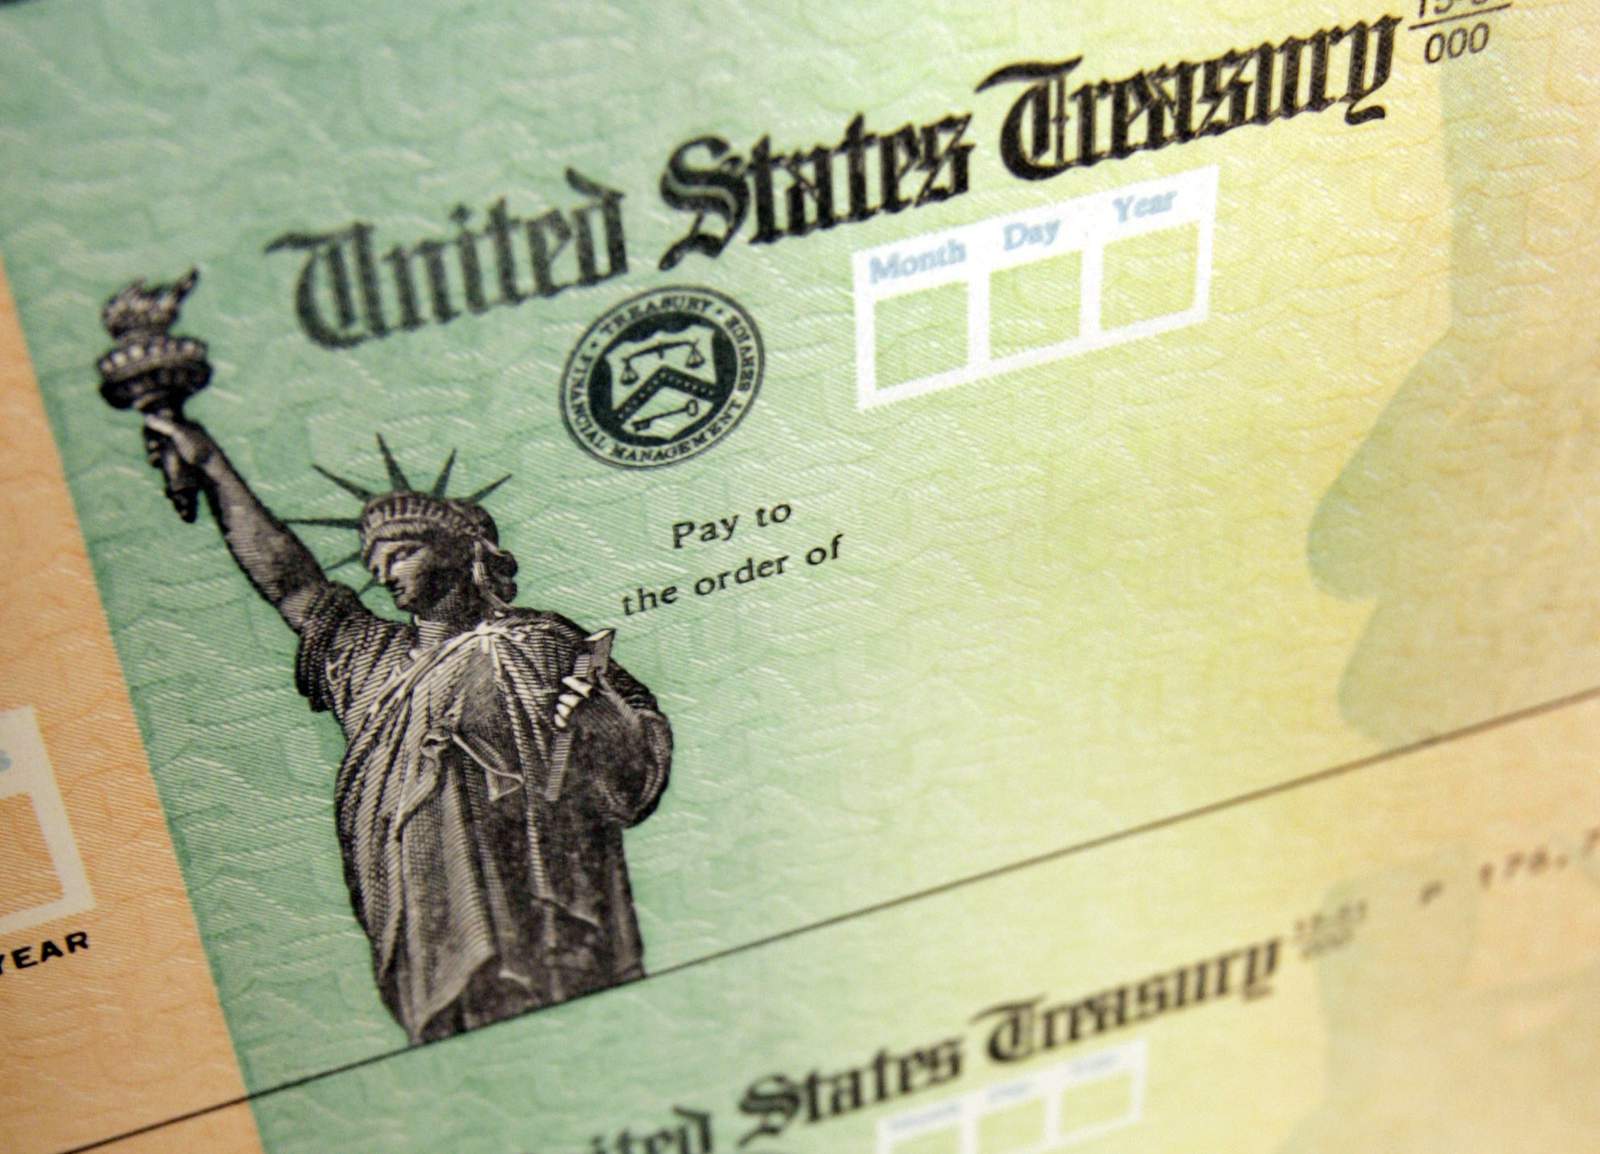 Ask 2: Who do I contact if I haven’t received my stimulus check?